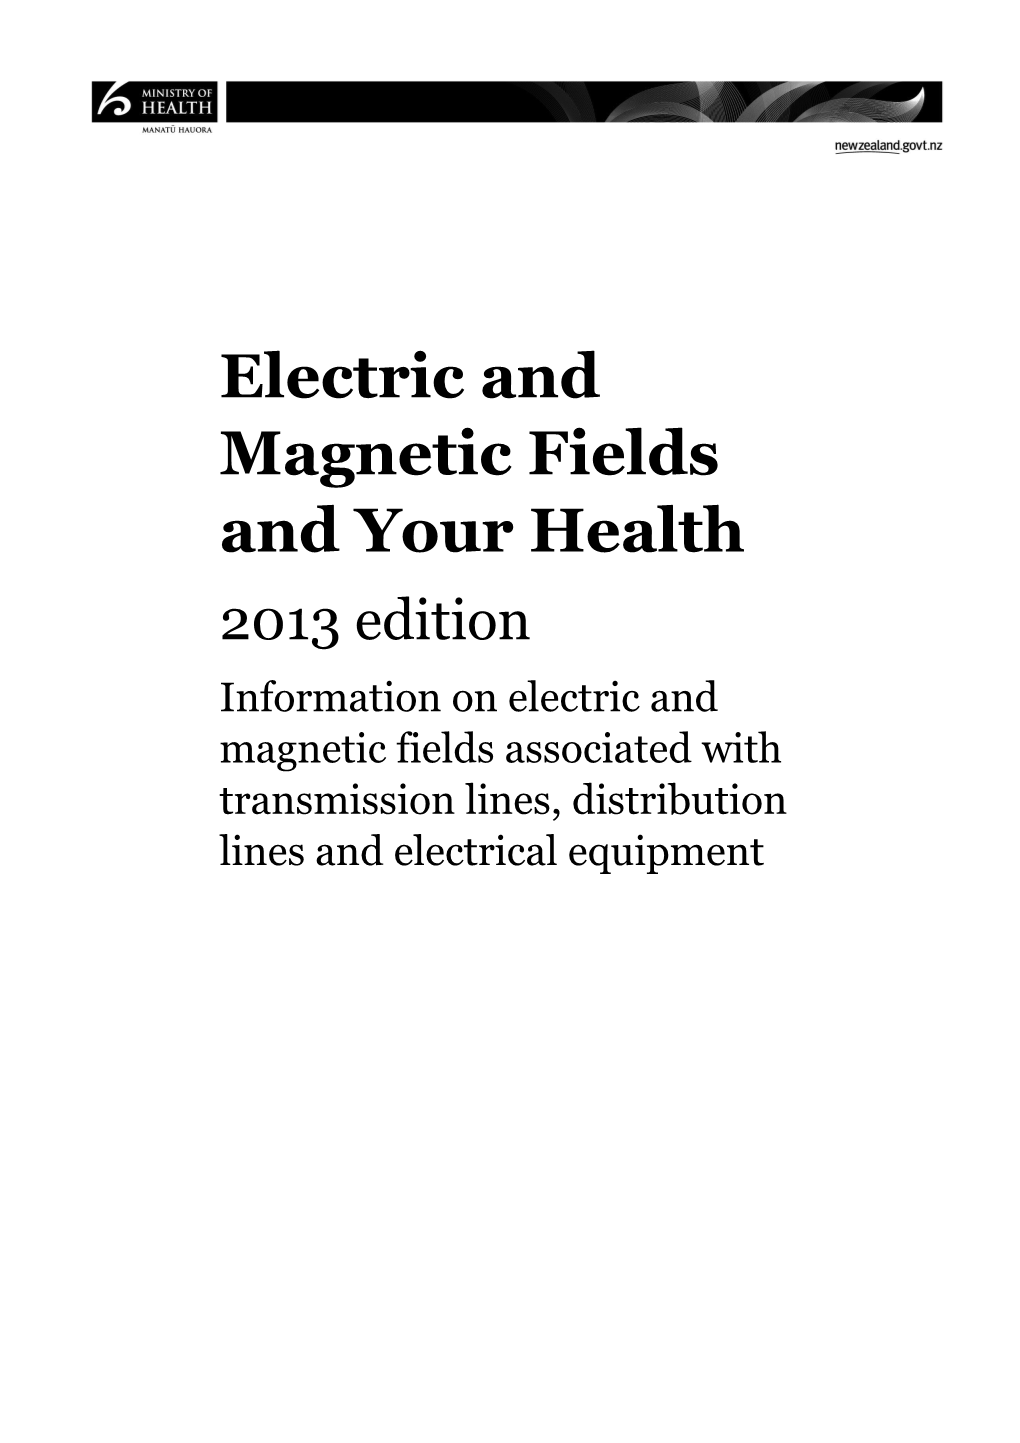 Electric and Magnetic Fields and Your Health